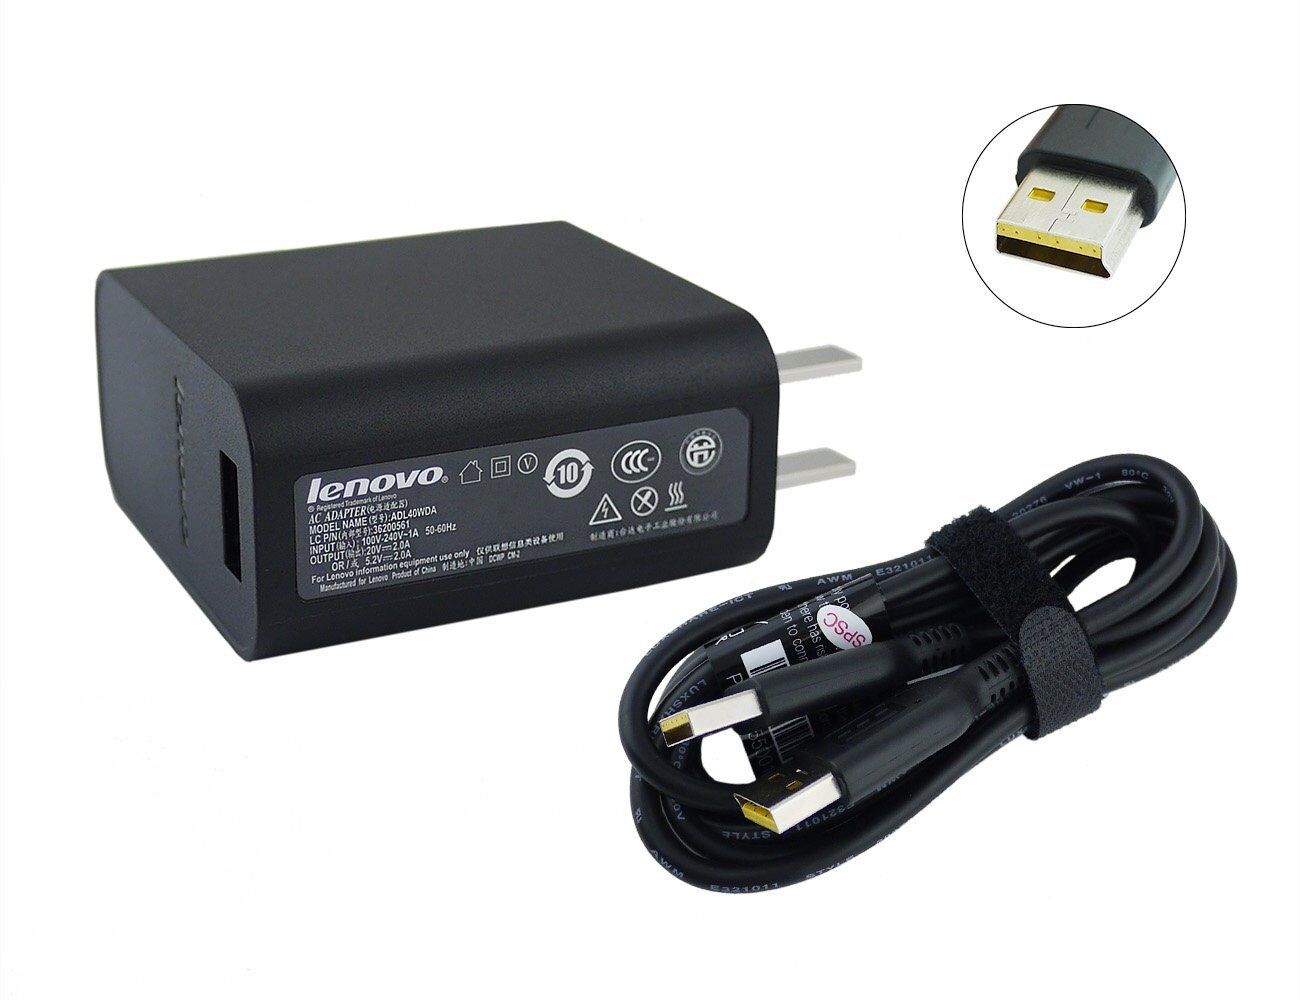 Lenovo 40W Yoga 3 Charger For Yoga 3 Pro-1370 Yoga 3-1170 Yoga 3-1470 AC Adapter Country/Region of Manufacture: China - Click Image to Close